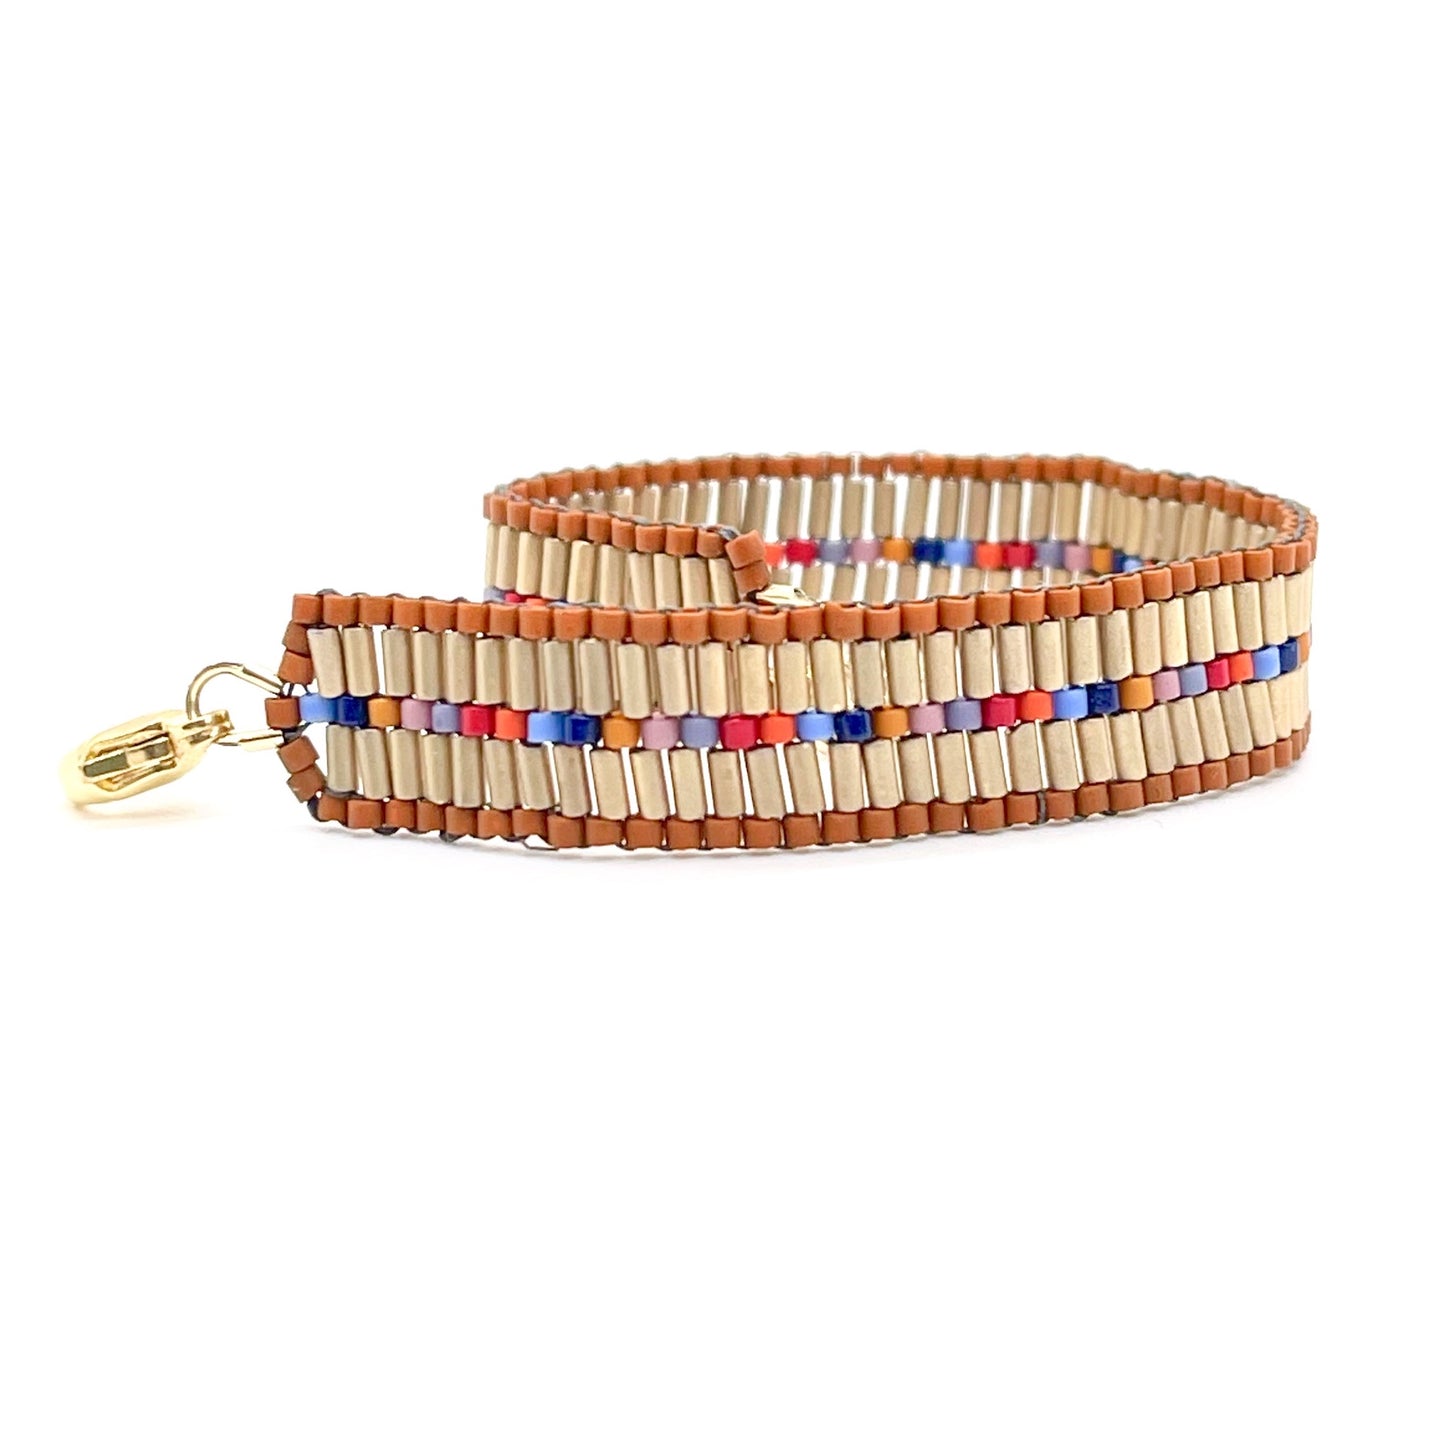 Gold and brown handmade bugle bead bracelet with pops of colorful beads in southwestern hues.